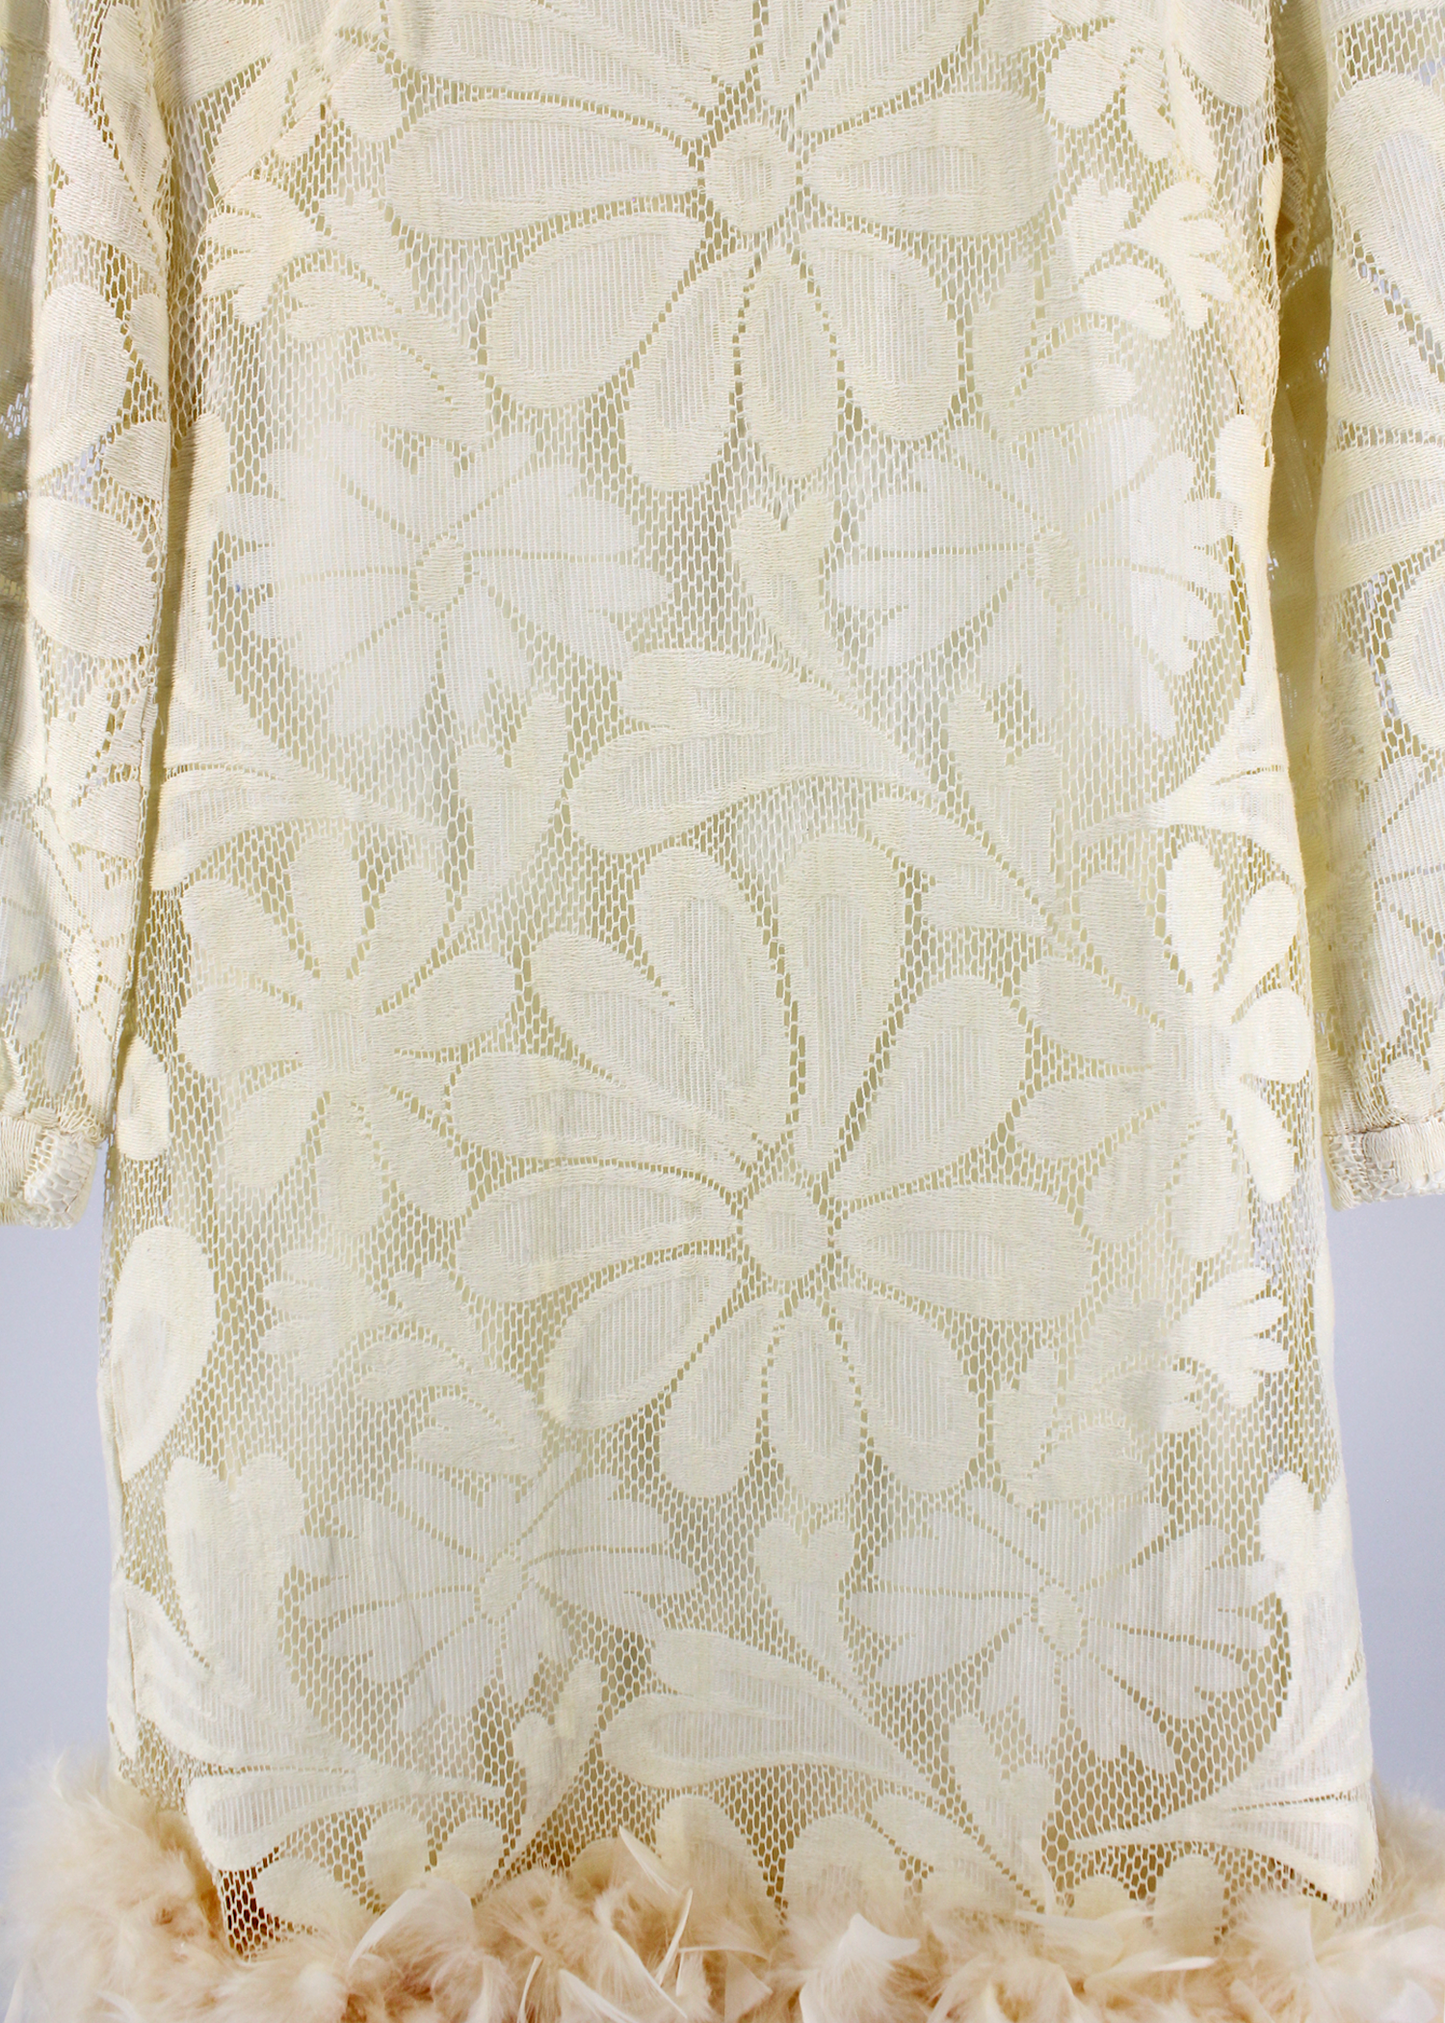 Dauphinette 1970s Ivory Stevie Lace Dress with Feathers- Size S